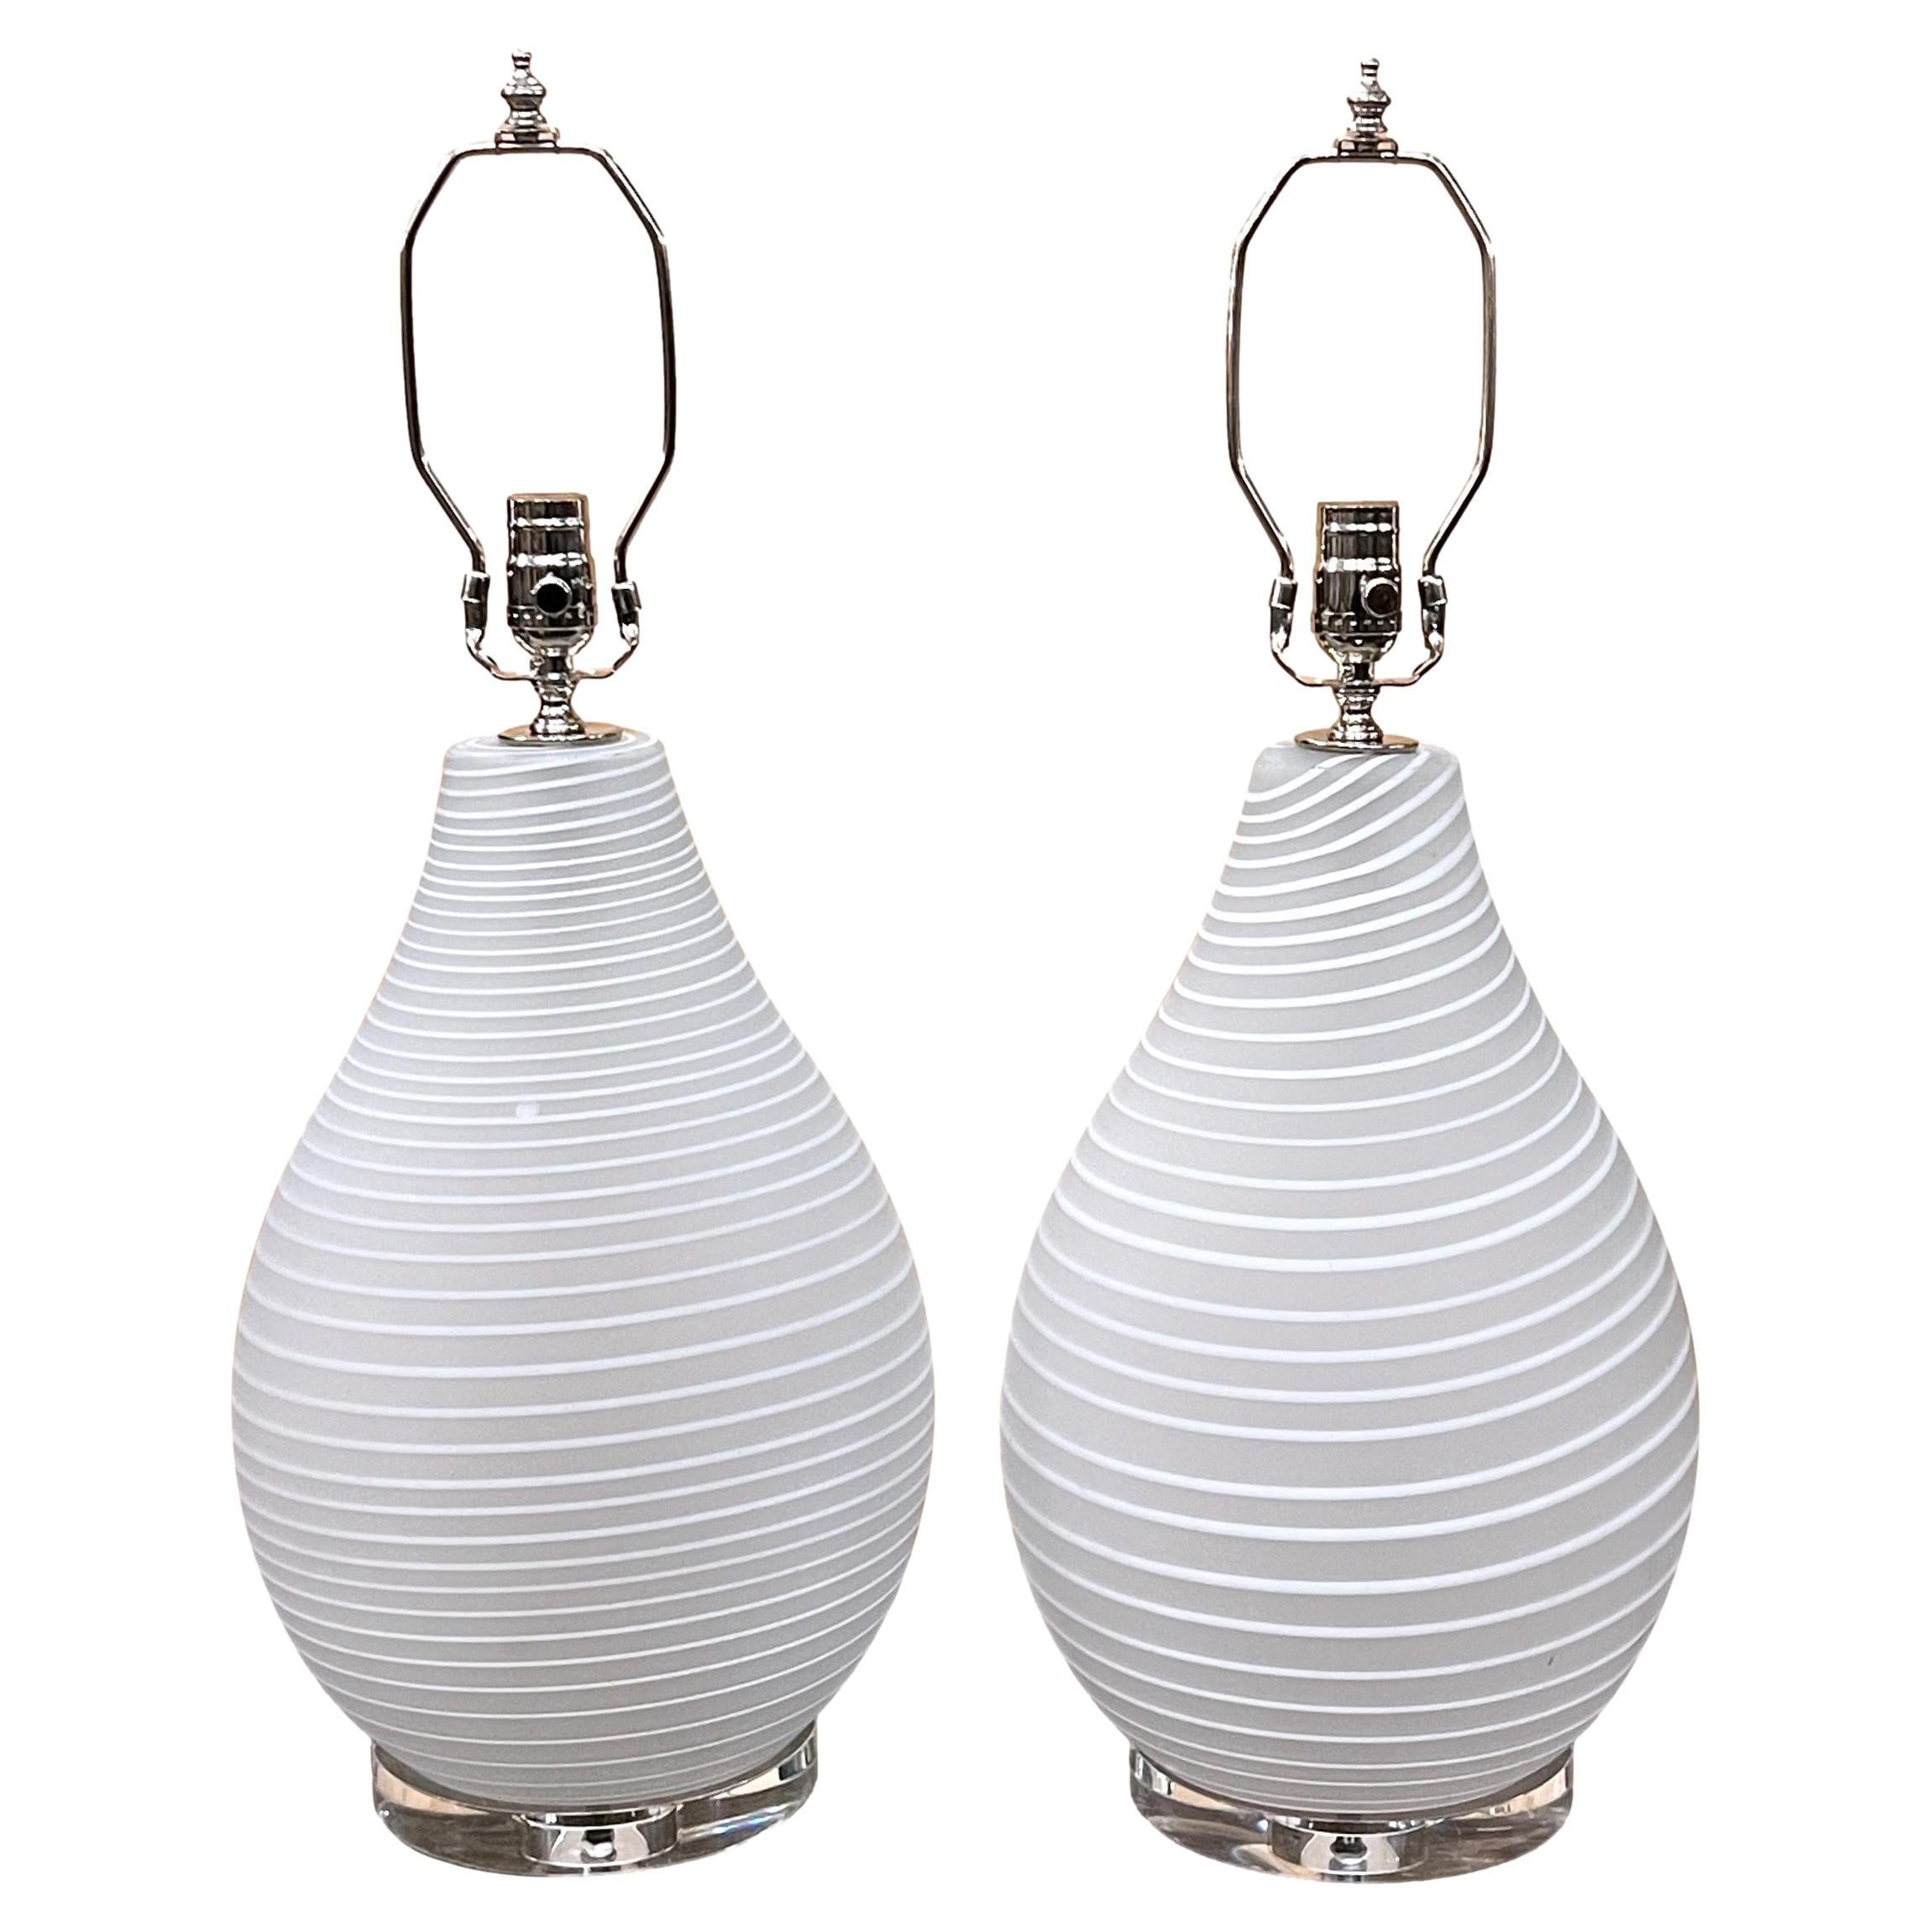 Pair of Italian Blown Glass Table Lamps